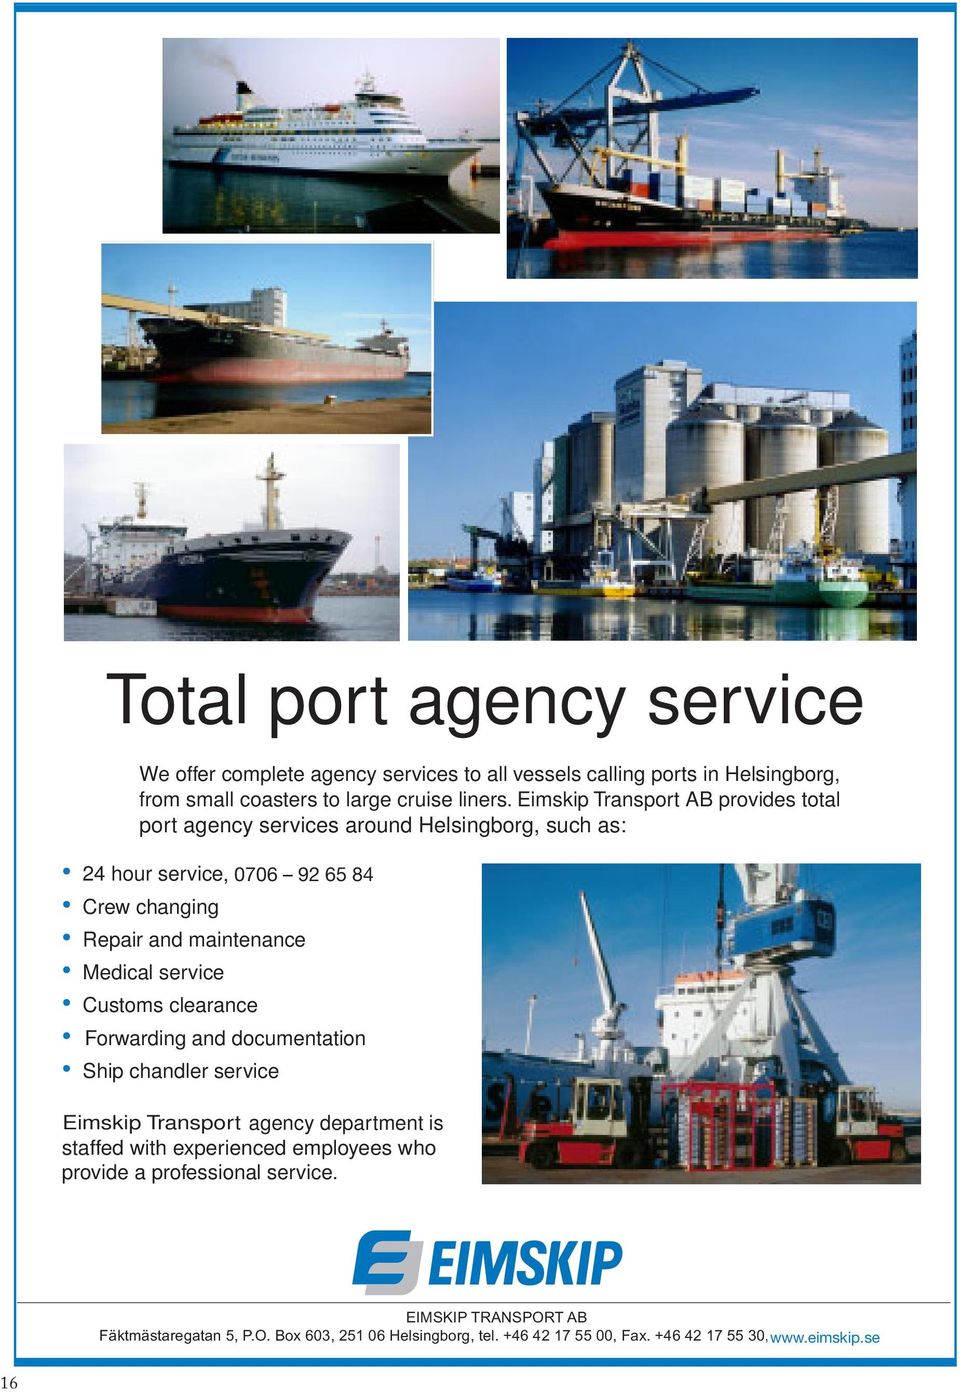 Customs clearance Forwarding and documentation Ship chandler service Andersson Eimskip Transport Shipping agency department is staffed with experienced employees who provide a professional service.